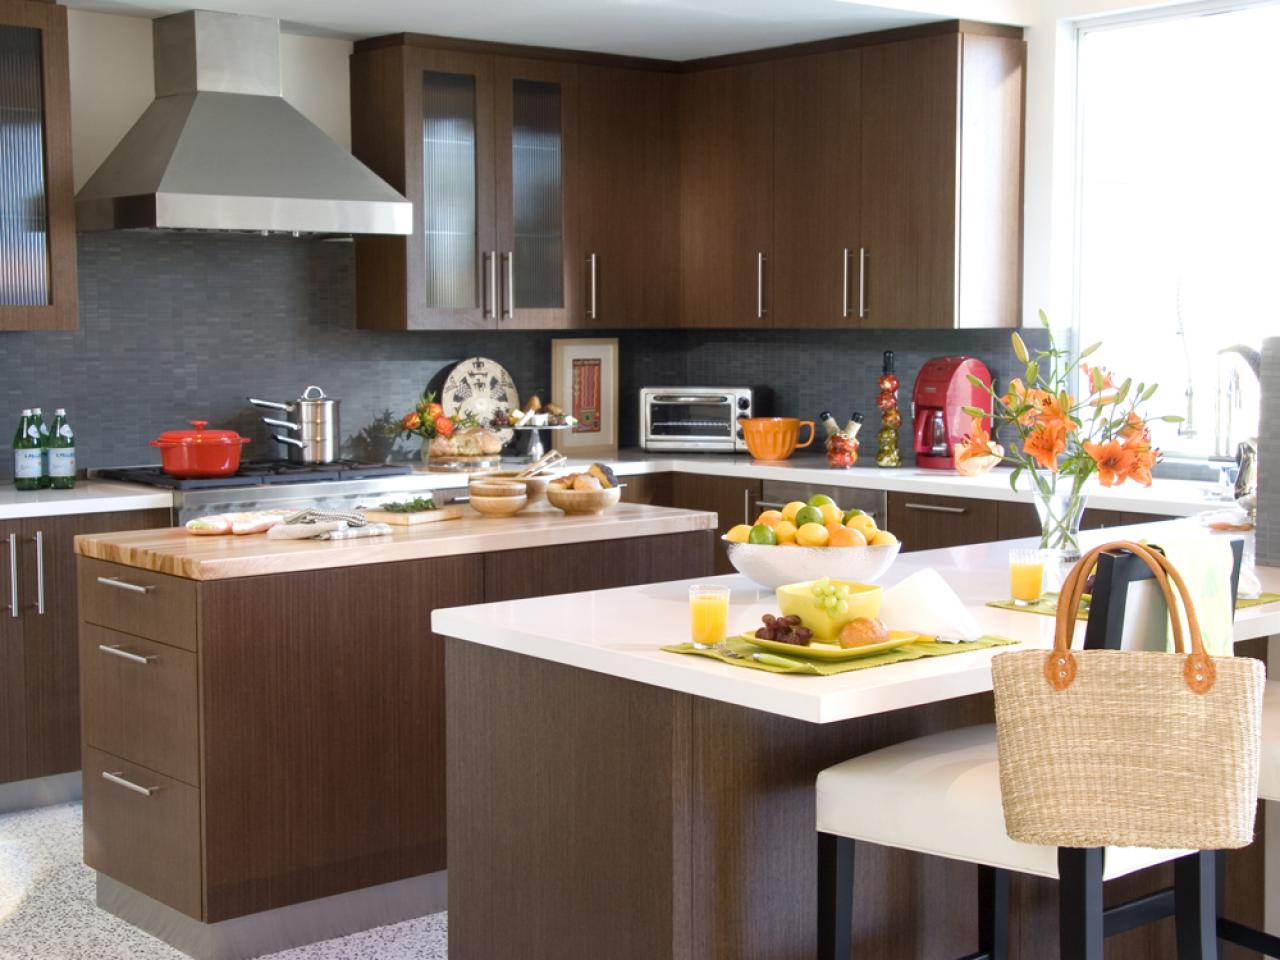 Kitchen Cabinets Pictures, Inexpensive Kitchen Cabinets And Countertops